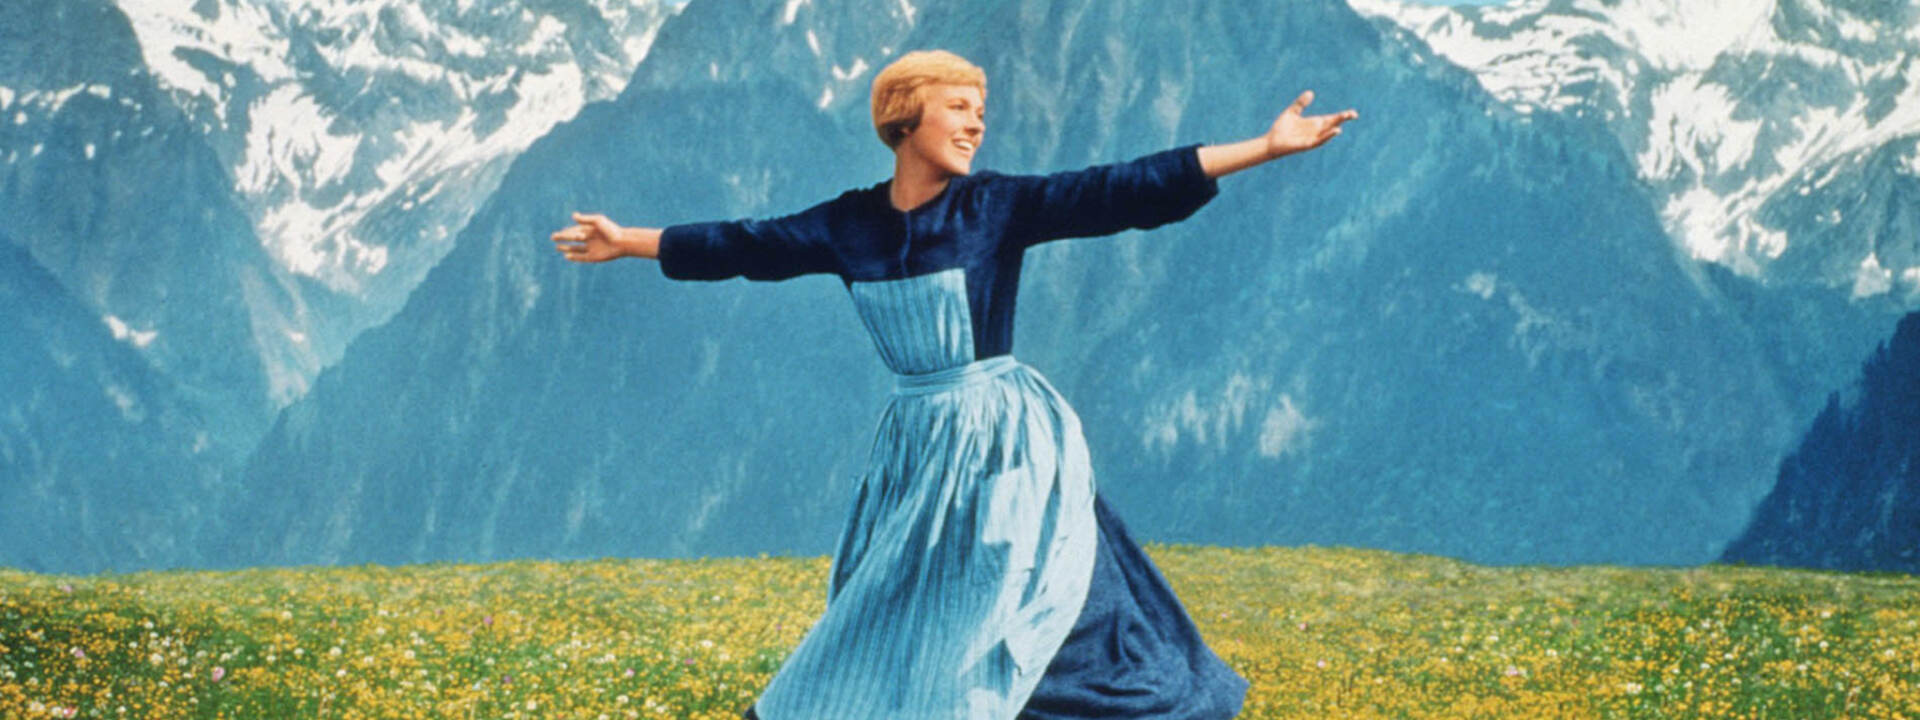 The Sound of Music film - Maria on the hill © 20th Century Fox